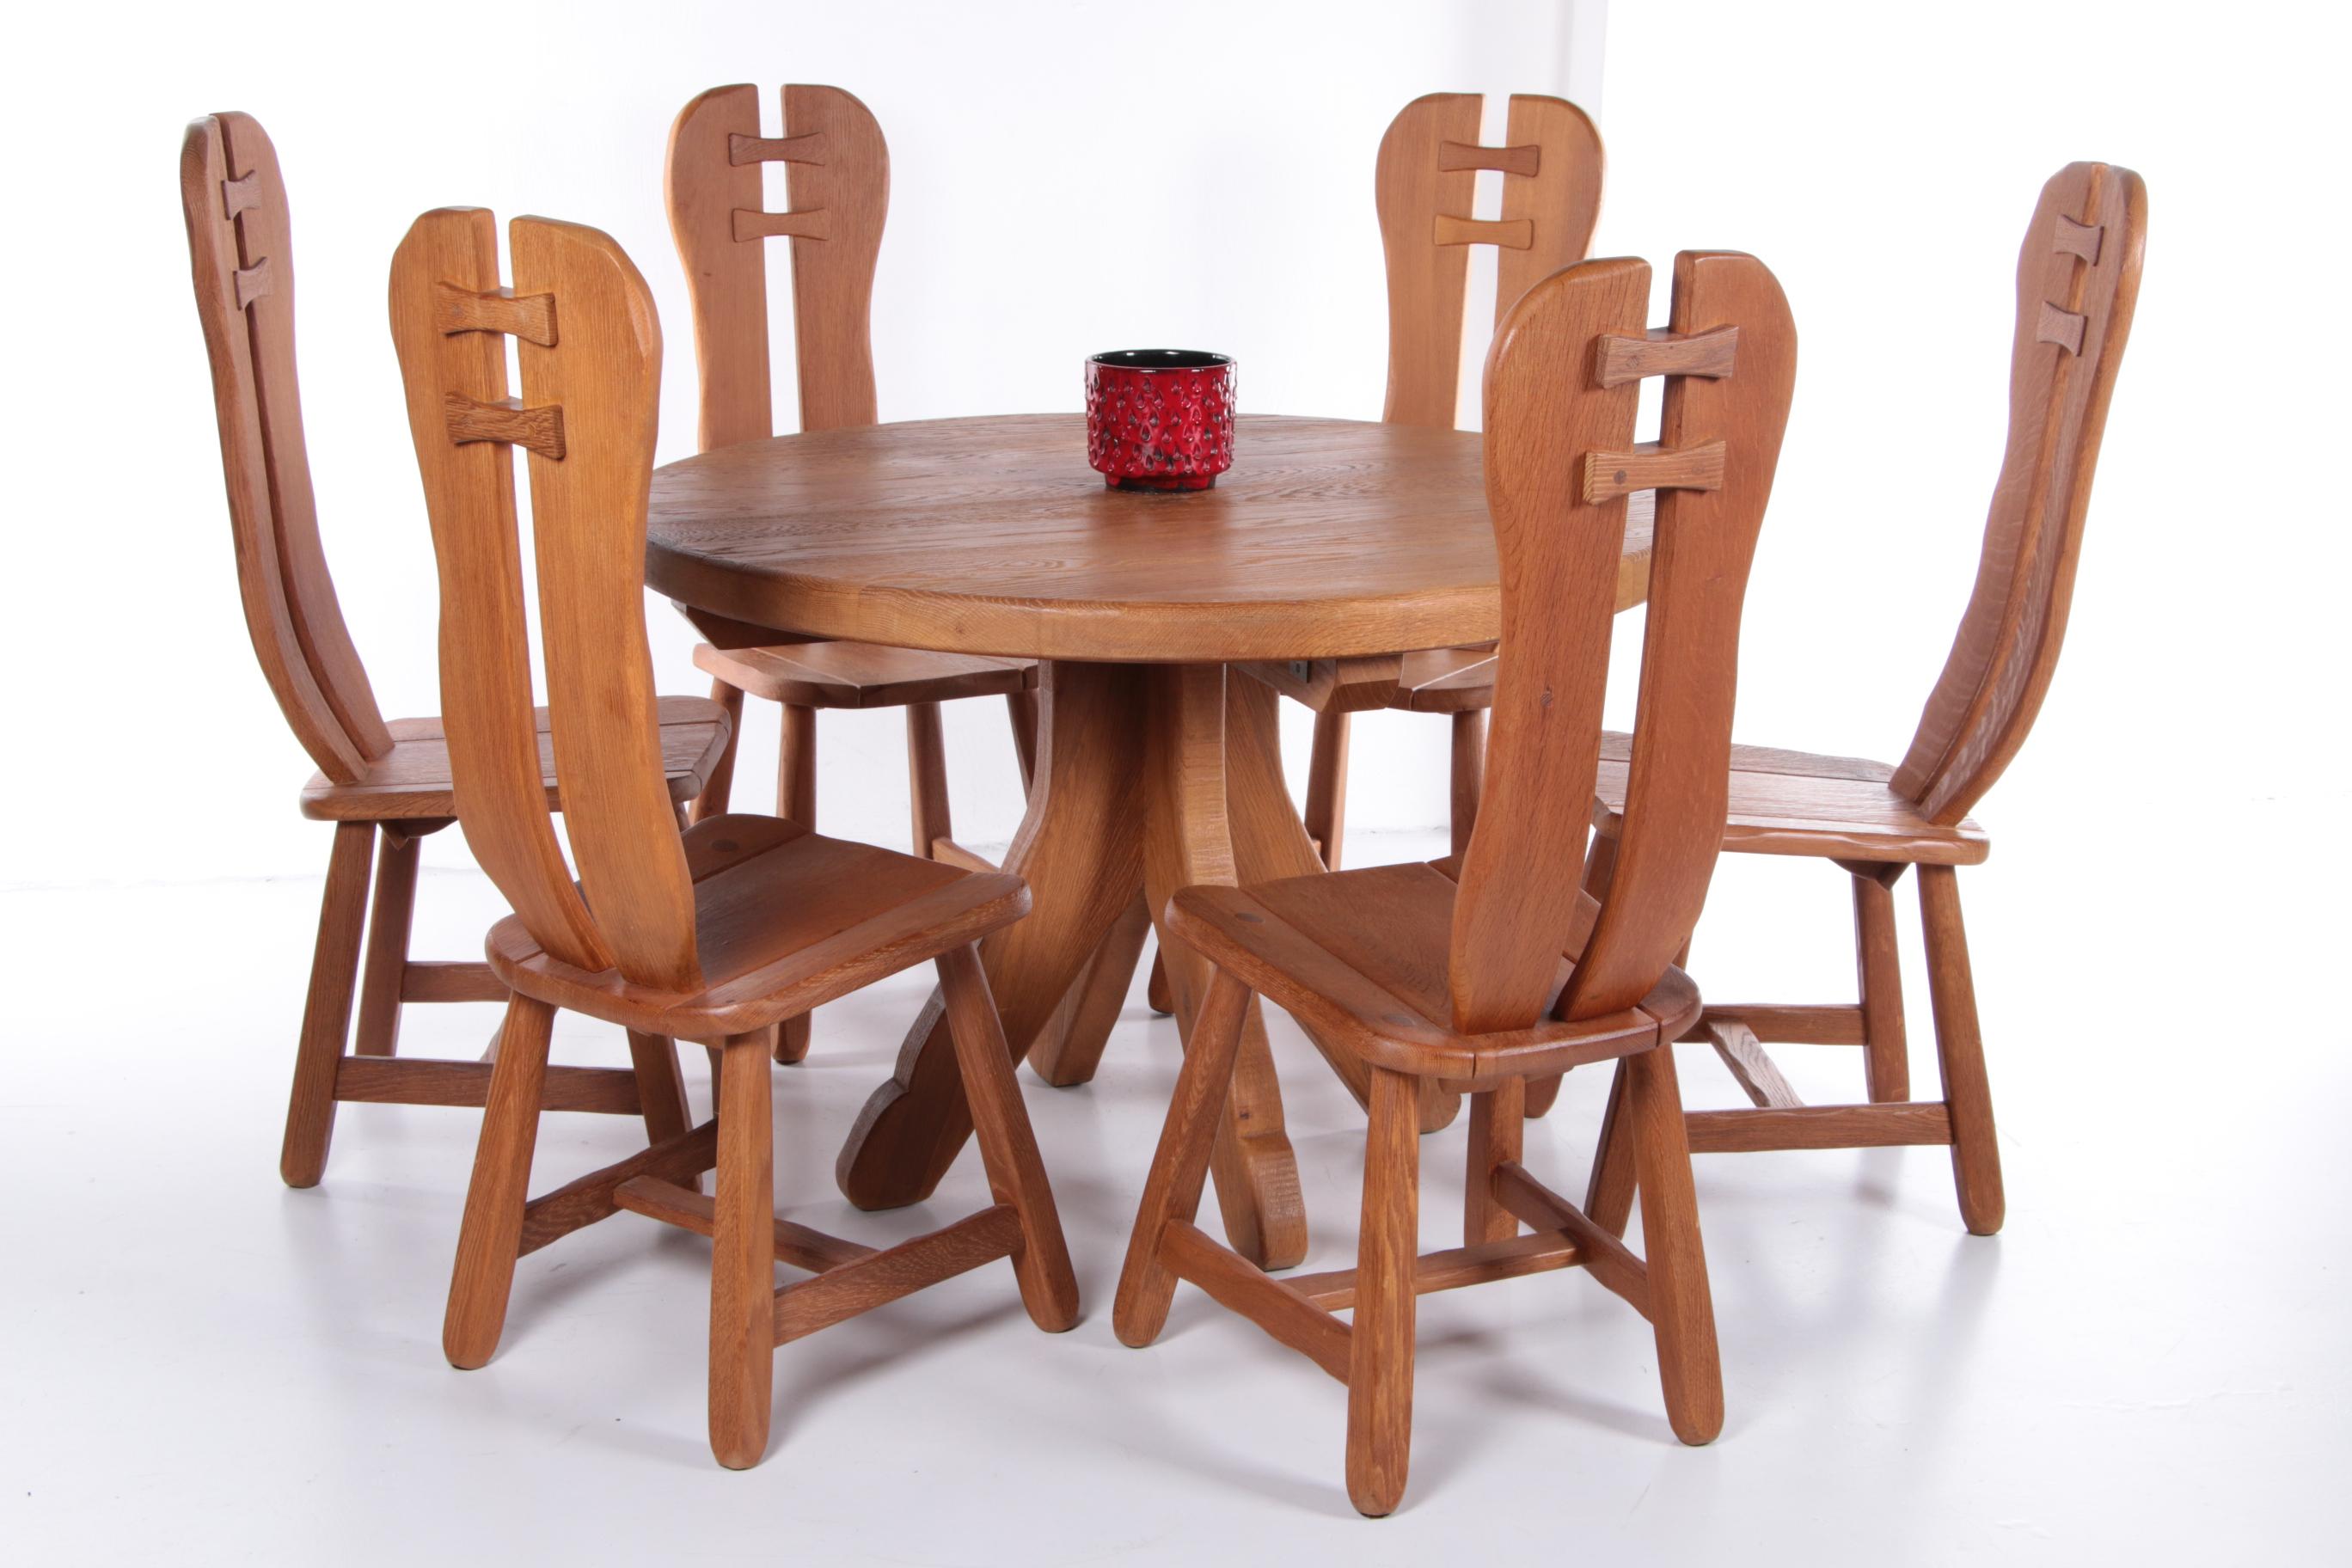 Beautiful sturdy brutalist chairs and table of Belgian make.
These chairs stand like a tree. Special design because of the high backrest. Solid oak wood.

Sit comfortably.

In good vintage condition.

Set of 6 dining room chairs made by